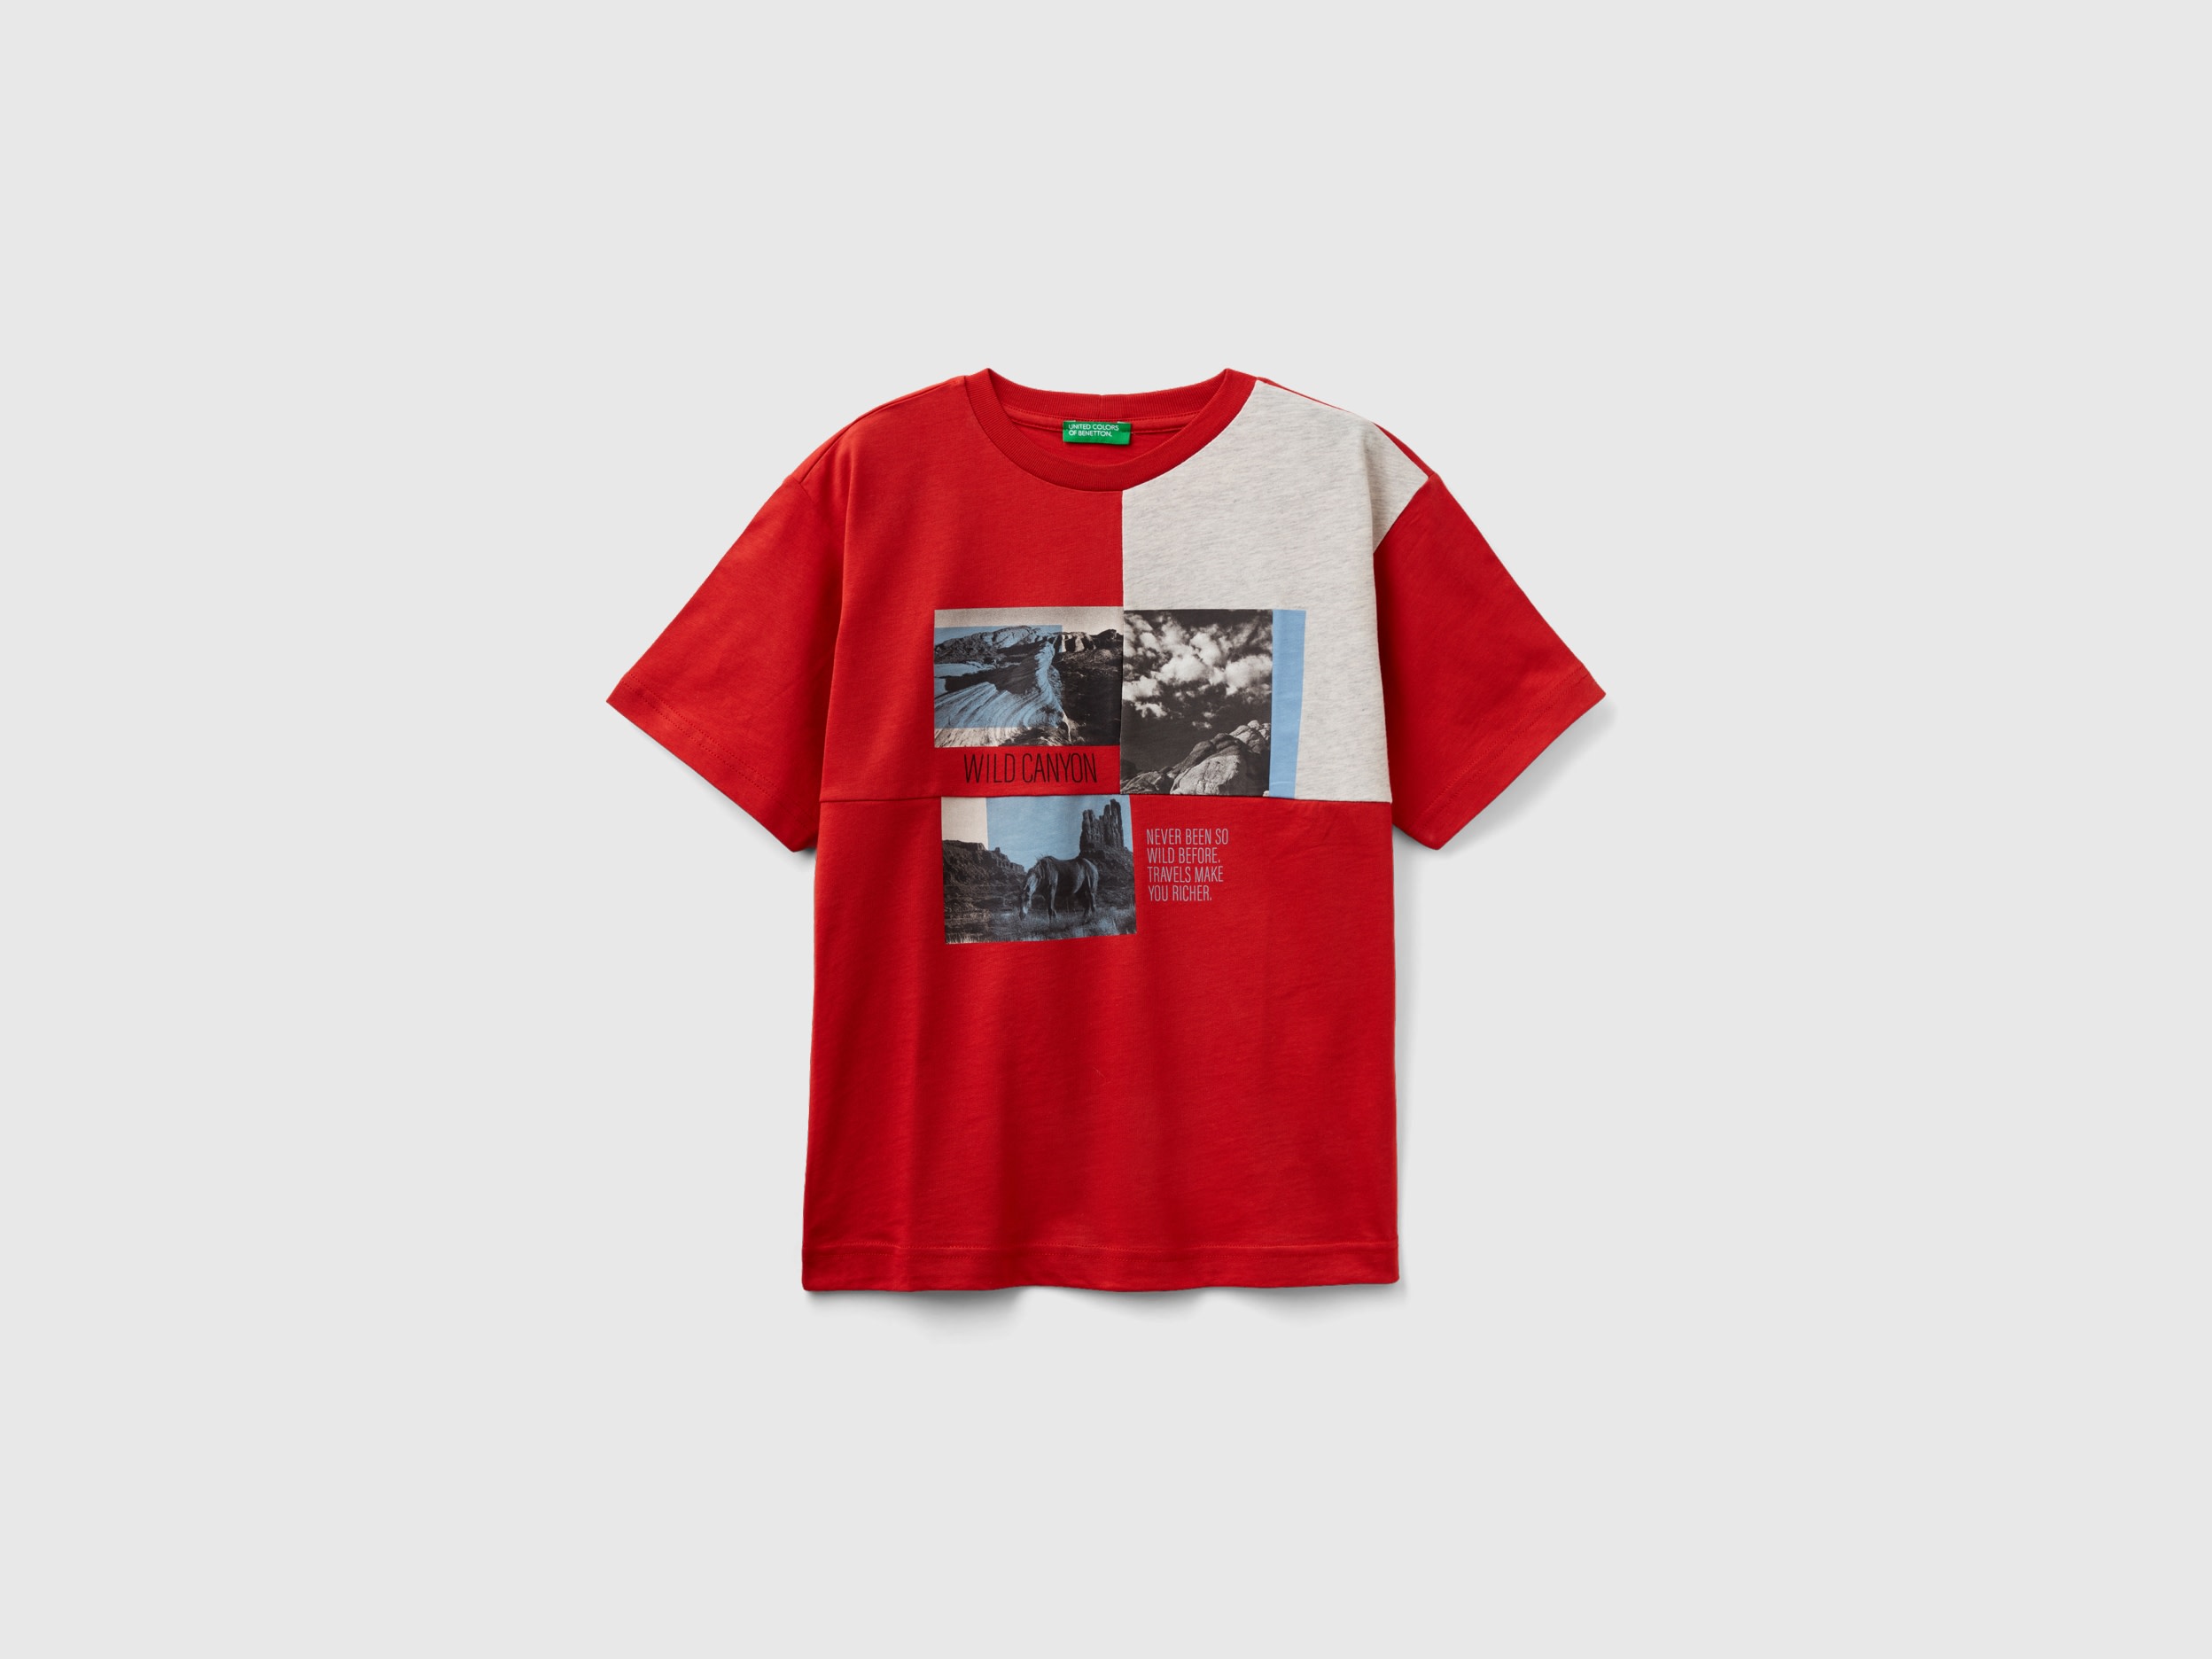 Benetton, T-shirt With Photo Print, size 3XL, Red, Kids